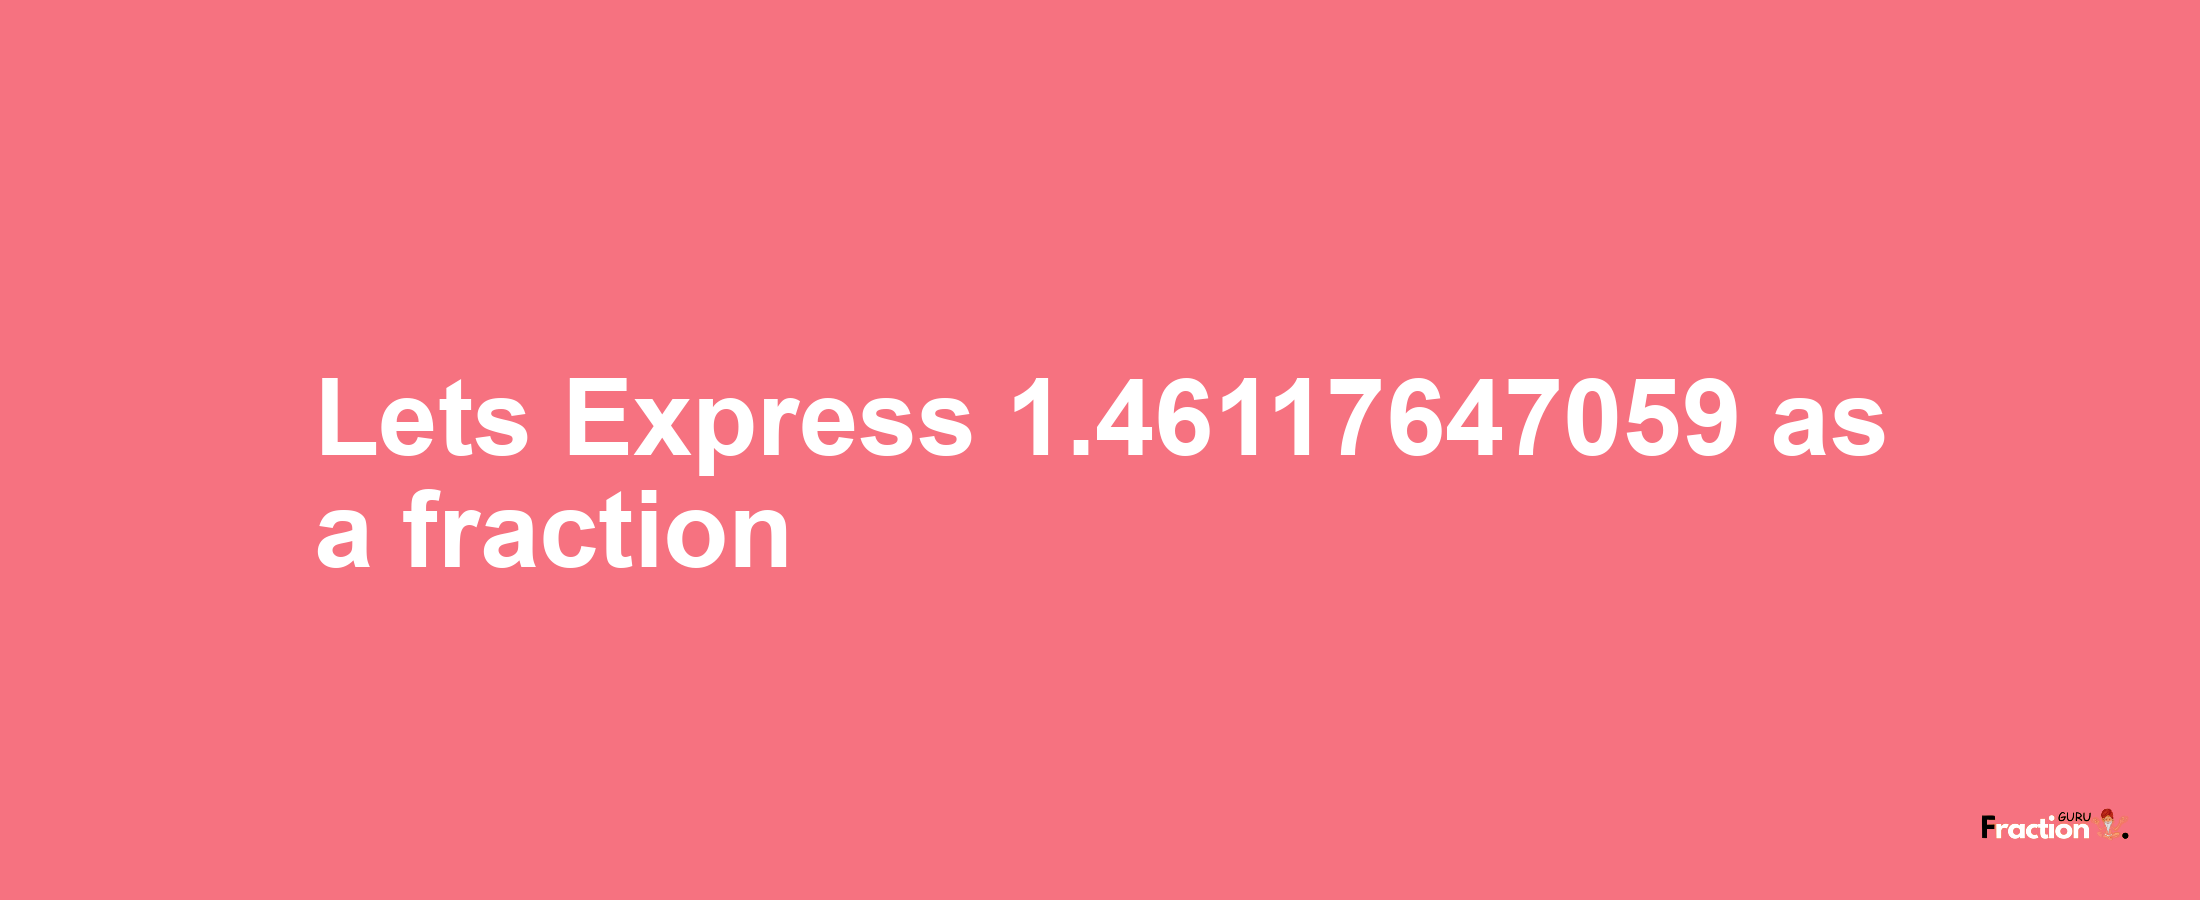 Lets Express 1.46117647059 as afraction